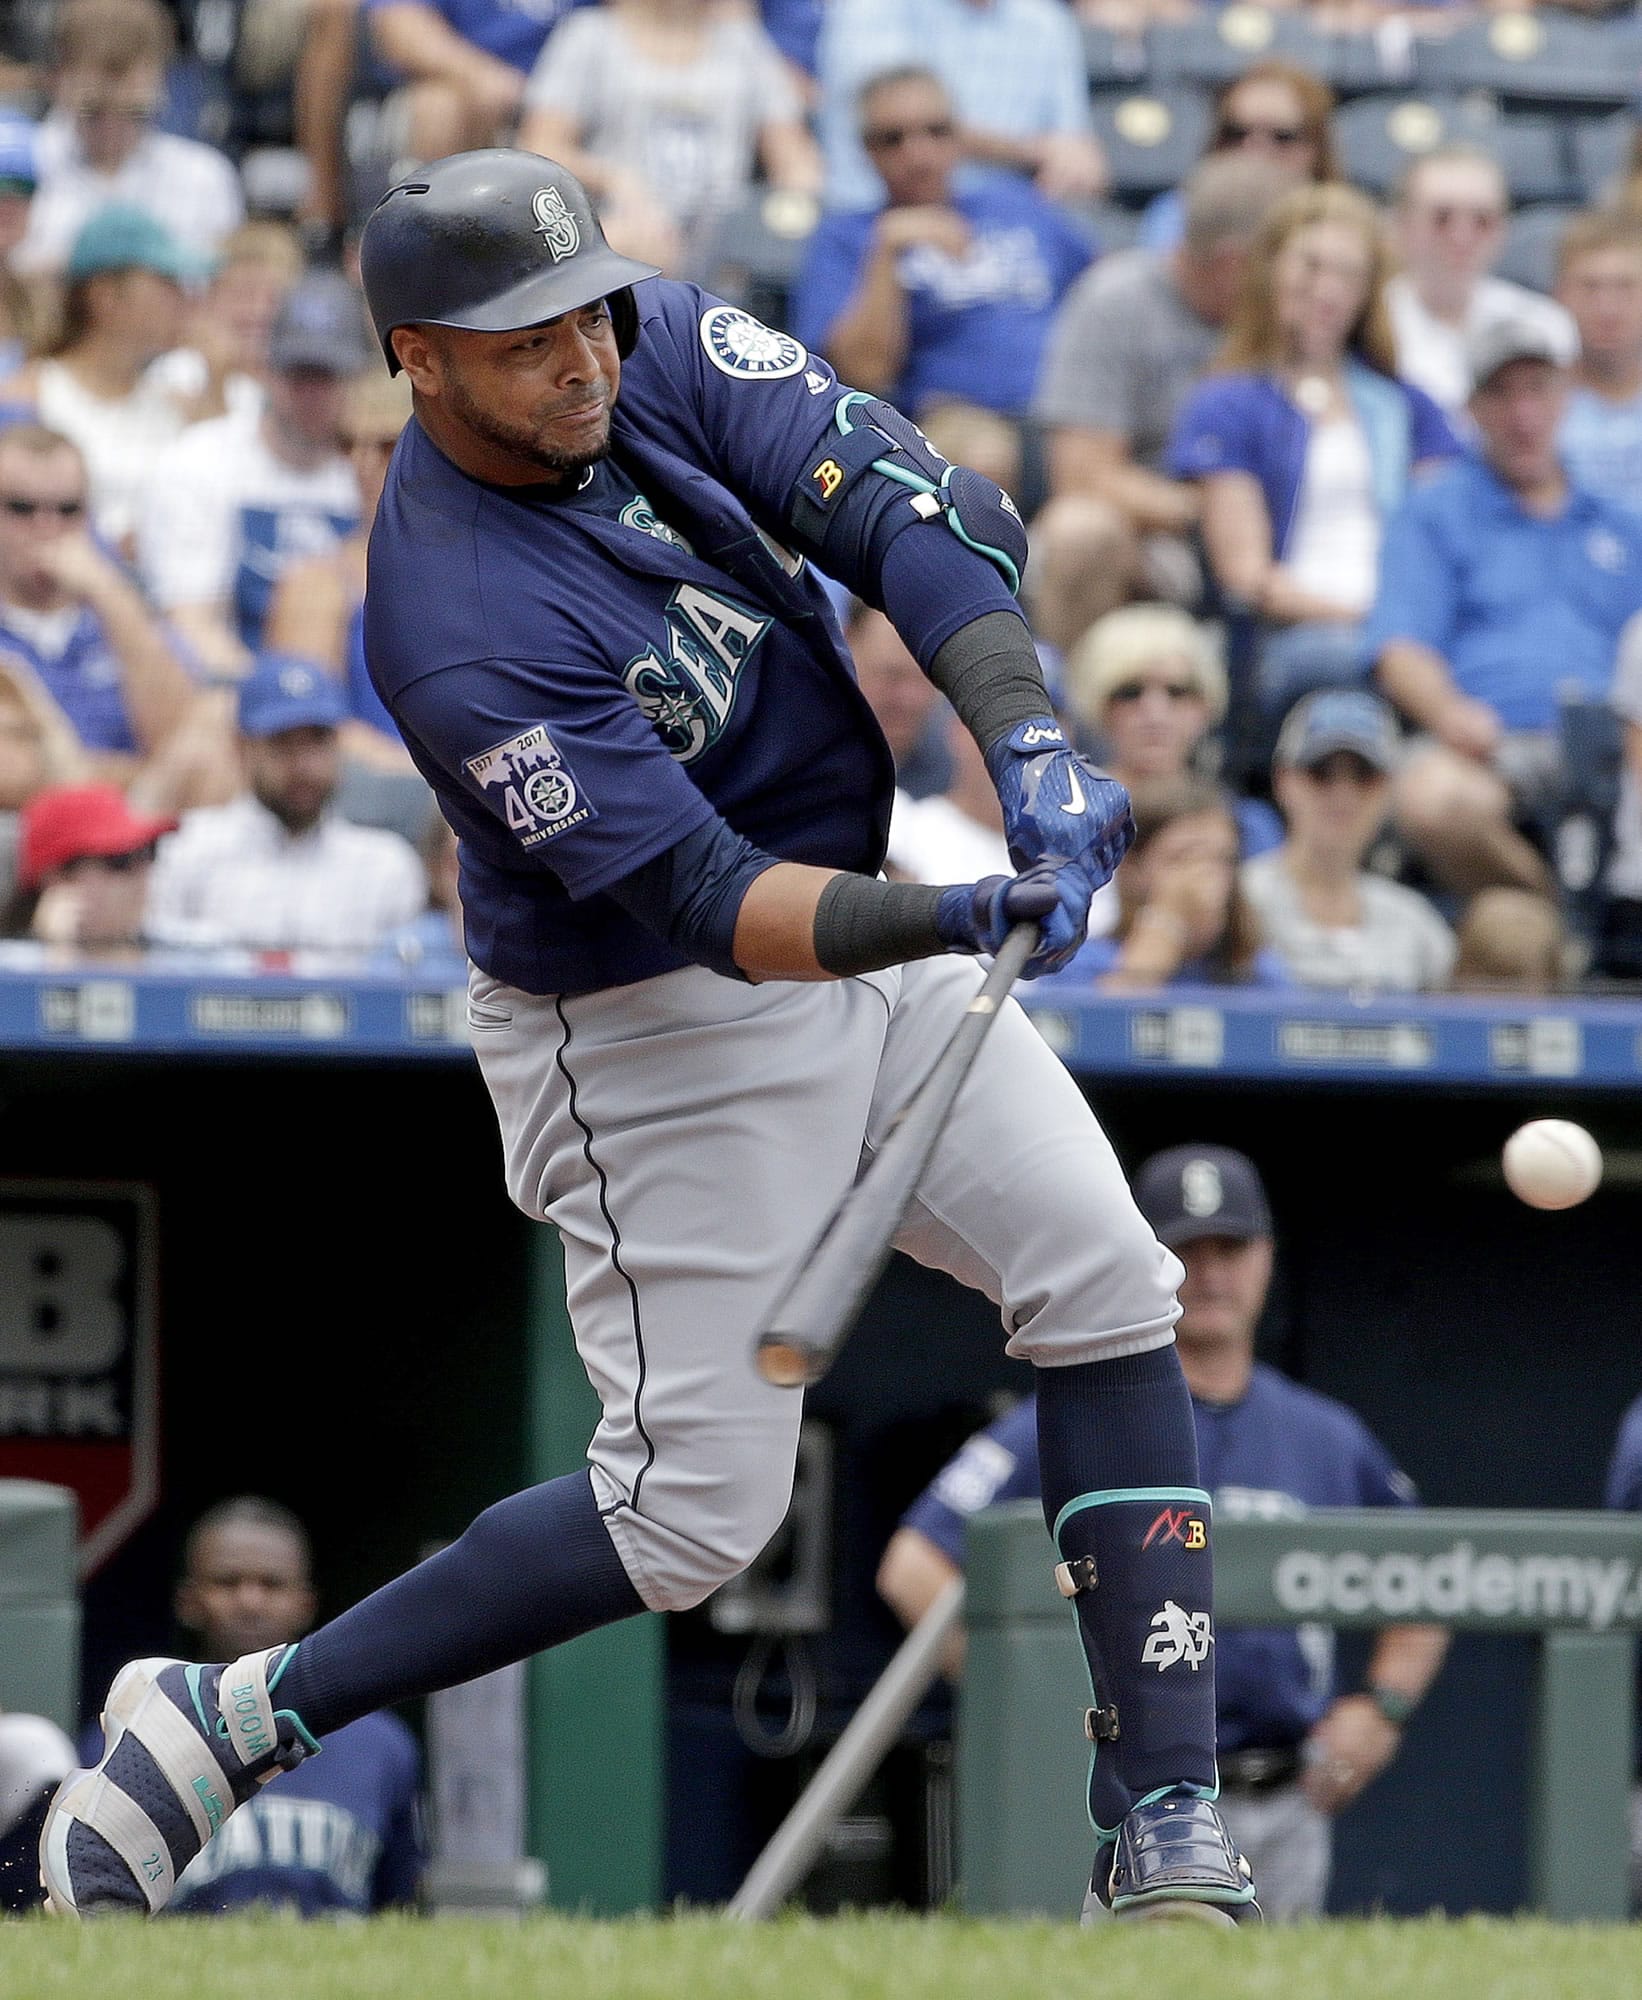 Seattle Mariners' Nelson Cruz hits a three-run home run during the second inning of the first baseball game in a doubleheader against the Kansas City Royals Sunday, Aug. 6, 2017, in Kansas City, Mo.